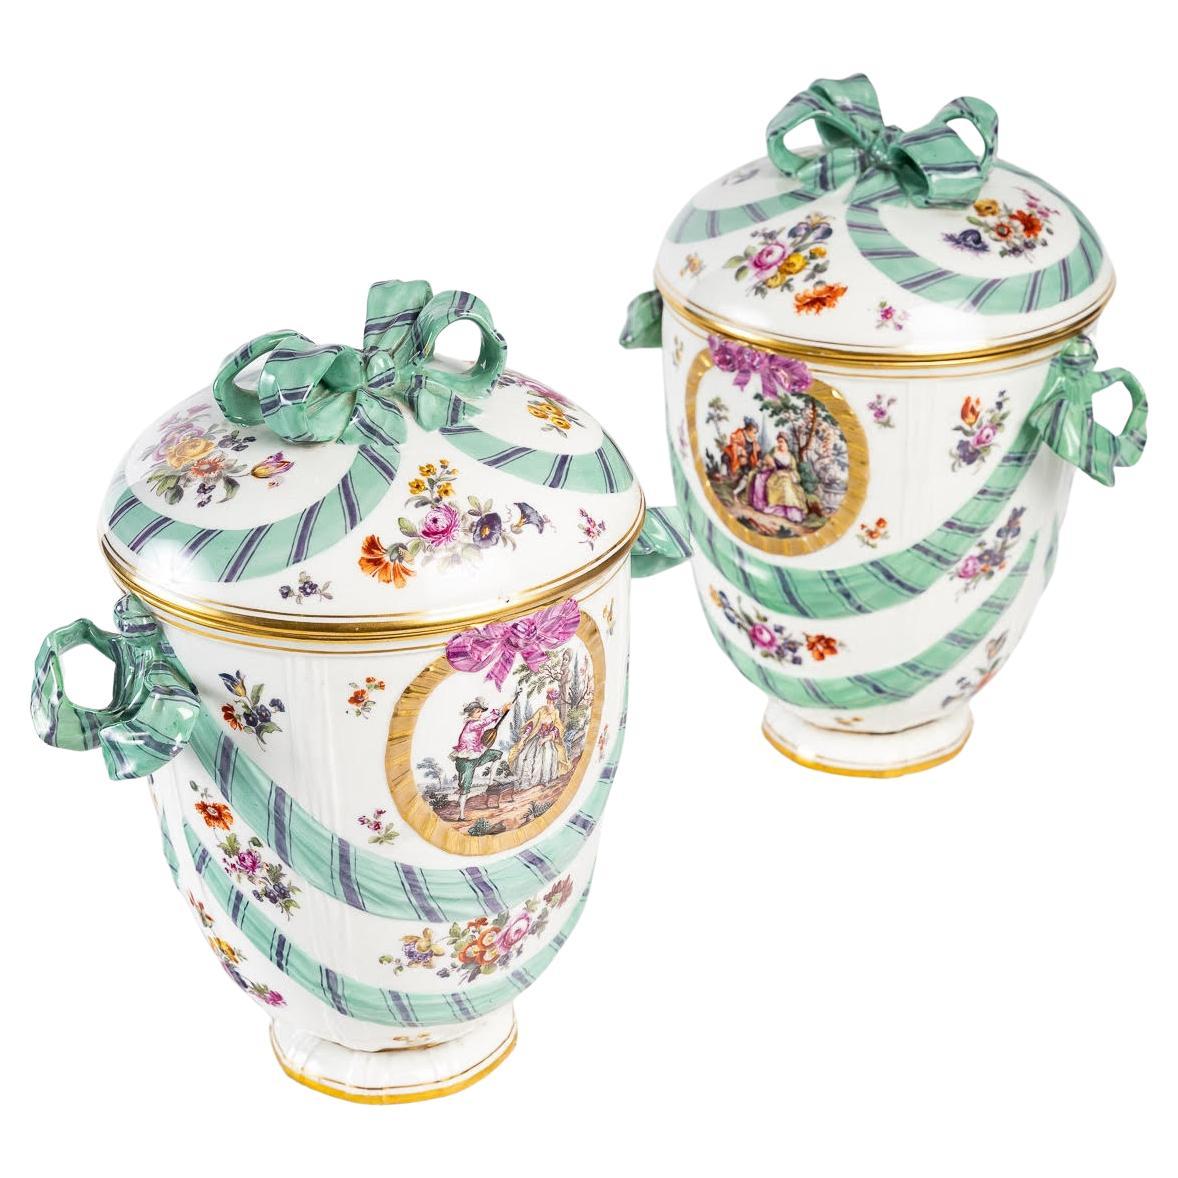 Pair of Large KPM Porcelain Covered Pots, 19th Century. For Sale